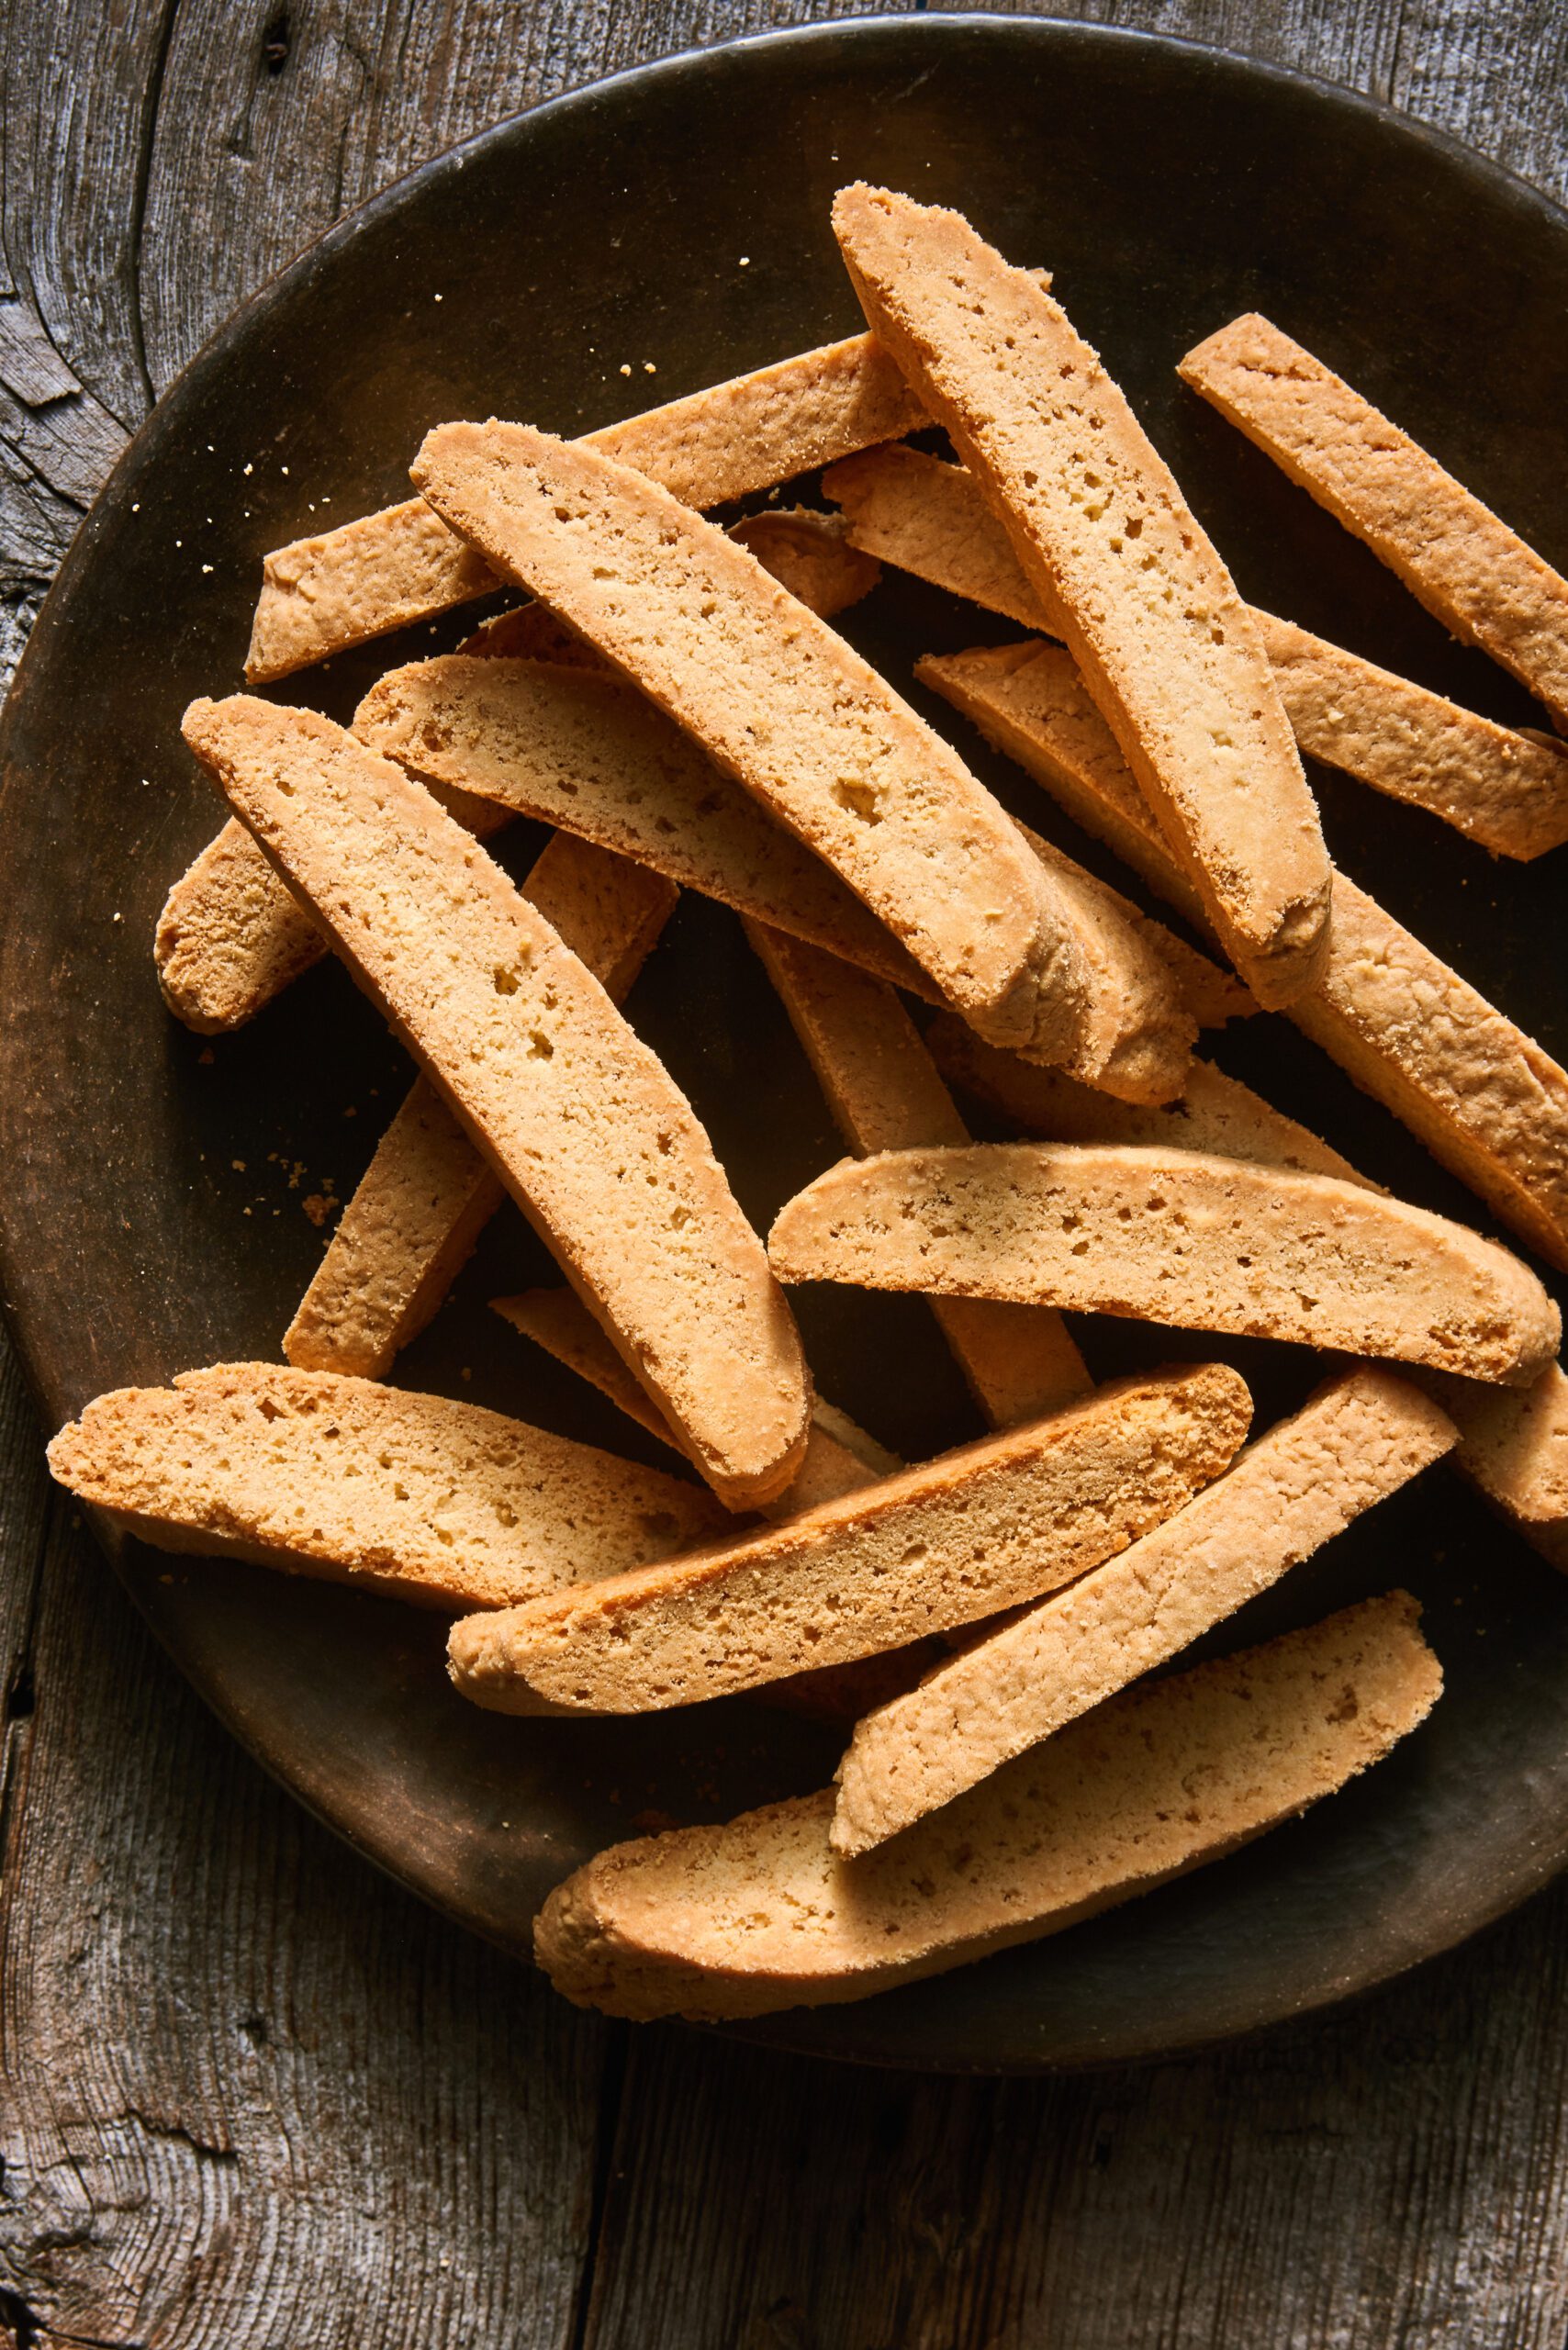 https://www.theclevercarrot.com/wp-content/uploads/2022/11/Anise-Biscotti-Plate-scaled.jpg